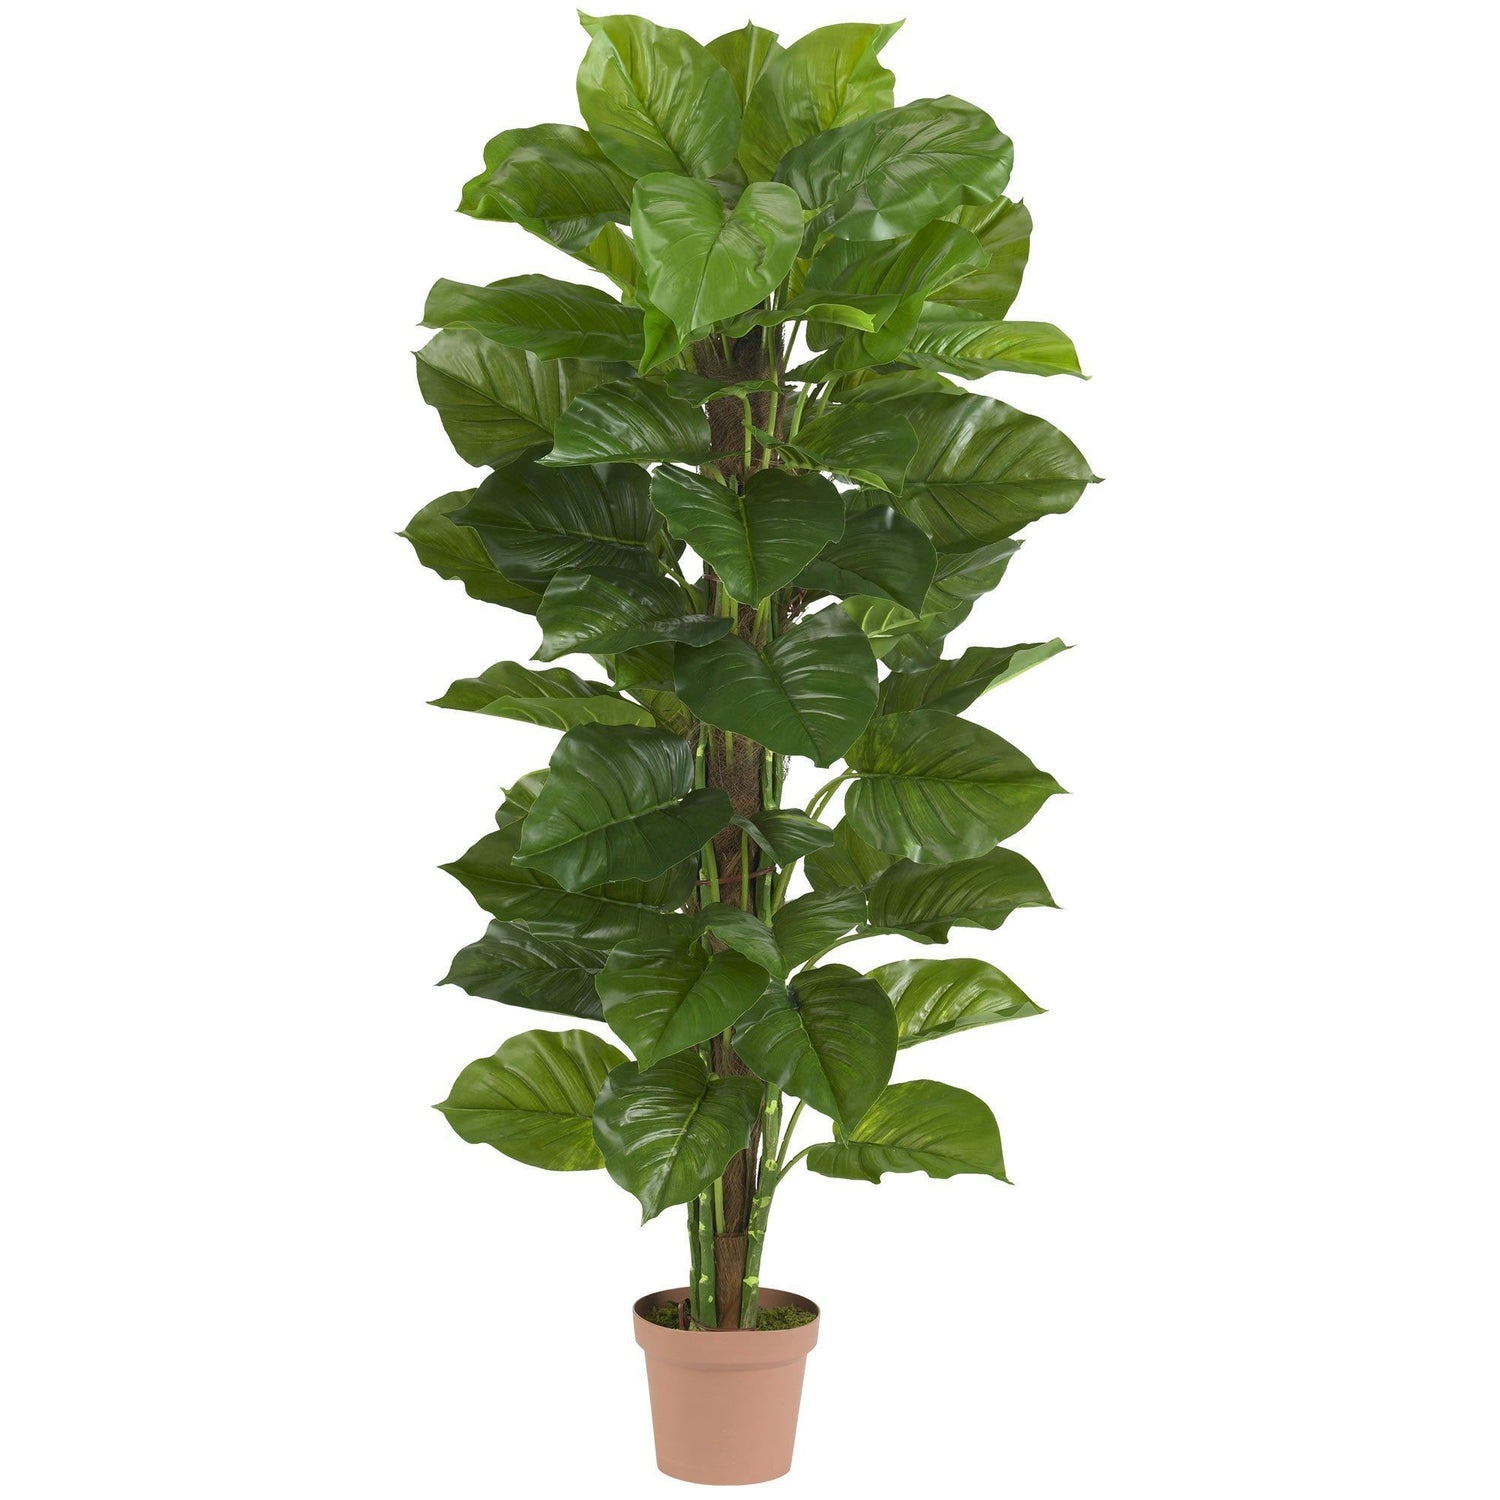 63" Artificial Large Leaf Philodendron Silk Plant (Real Touch)"